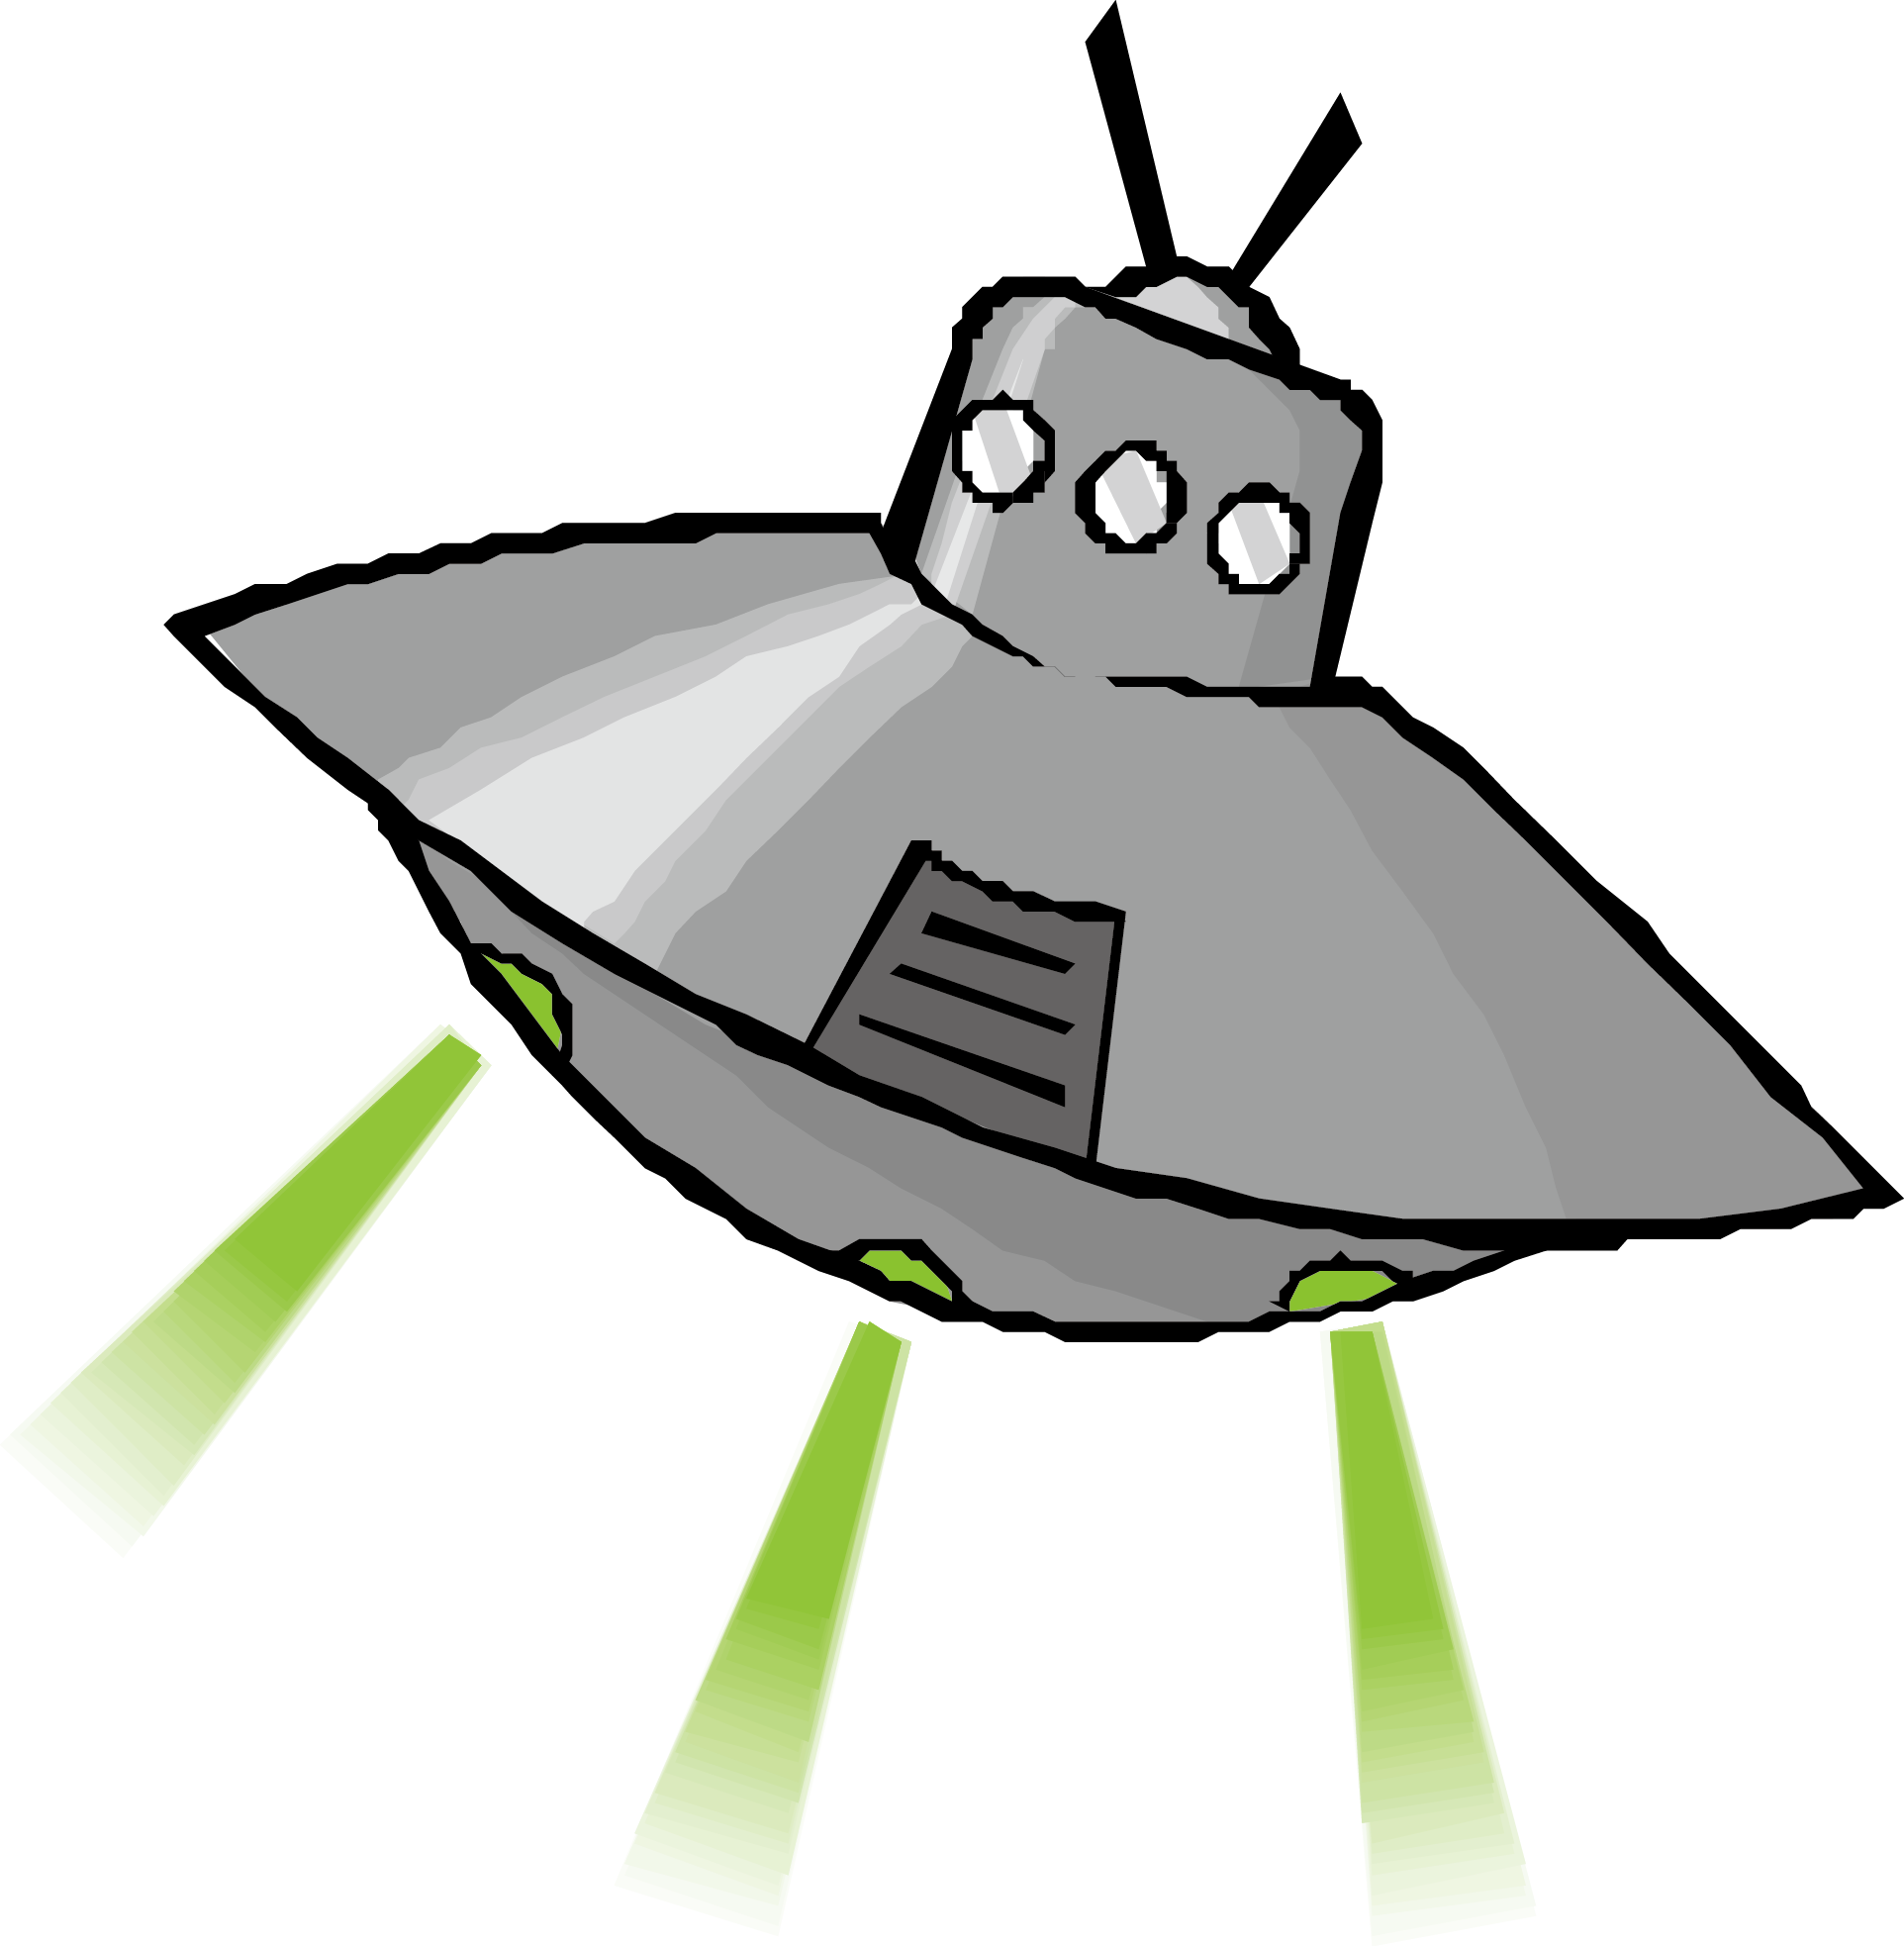 Euclidean Vector Unidentified Flying Object Illustration - Unidentified ...